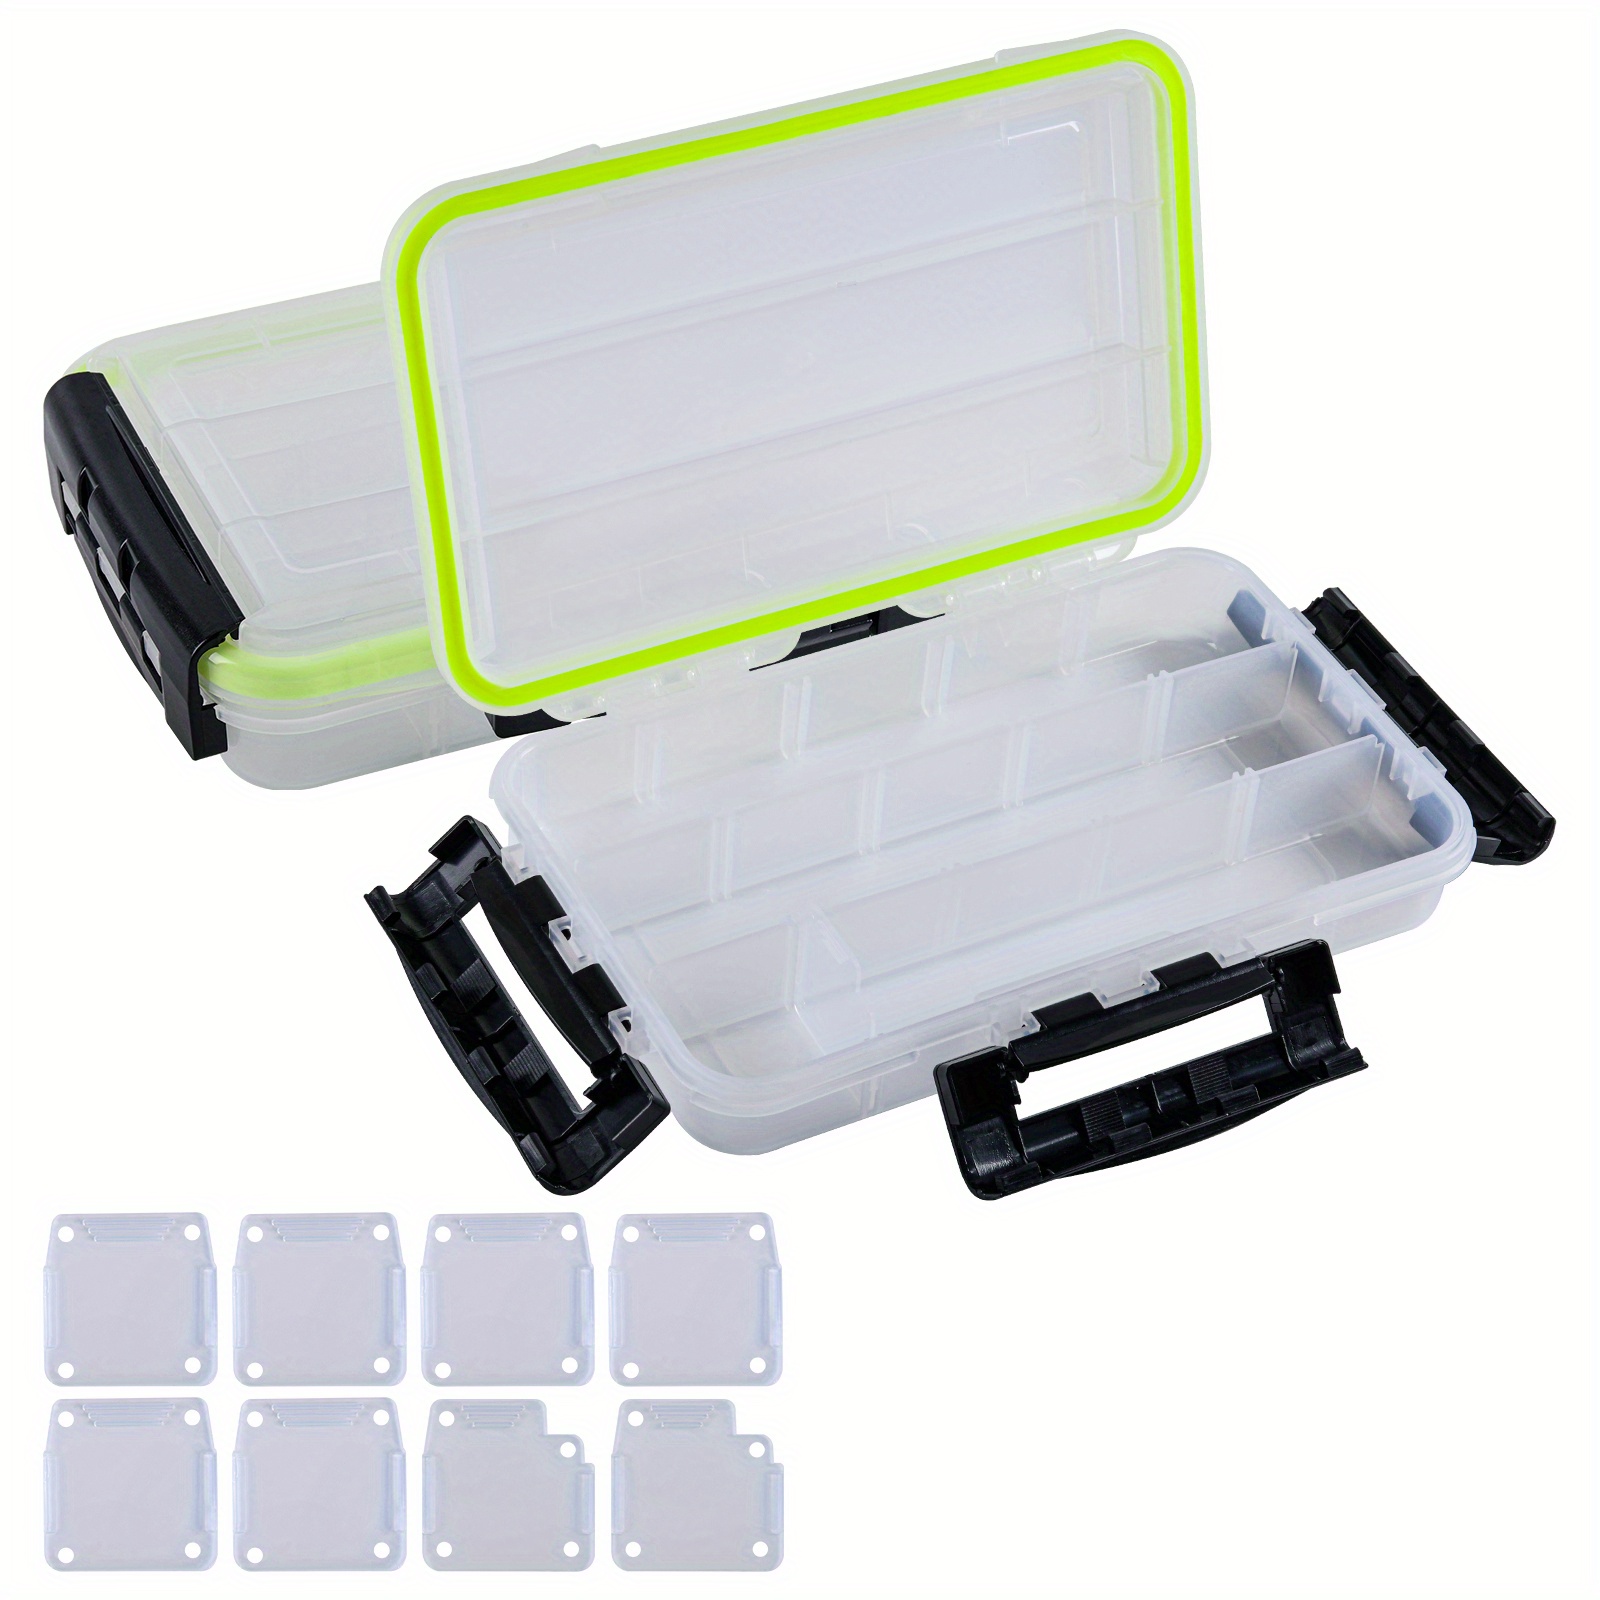 Organize Your Fishing Tackle Box With *'s 1pc Airtight, Waterproof,  Floating Tray - 3600/3700 Dividers!